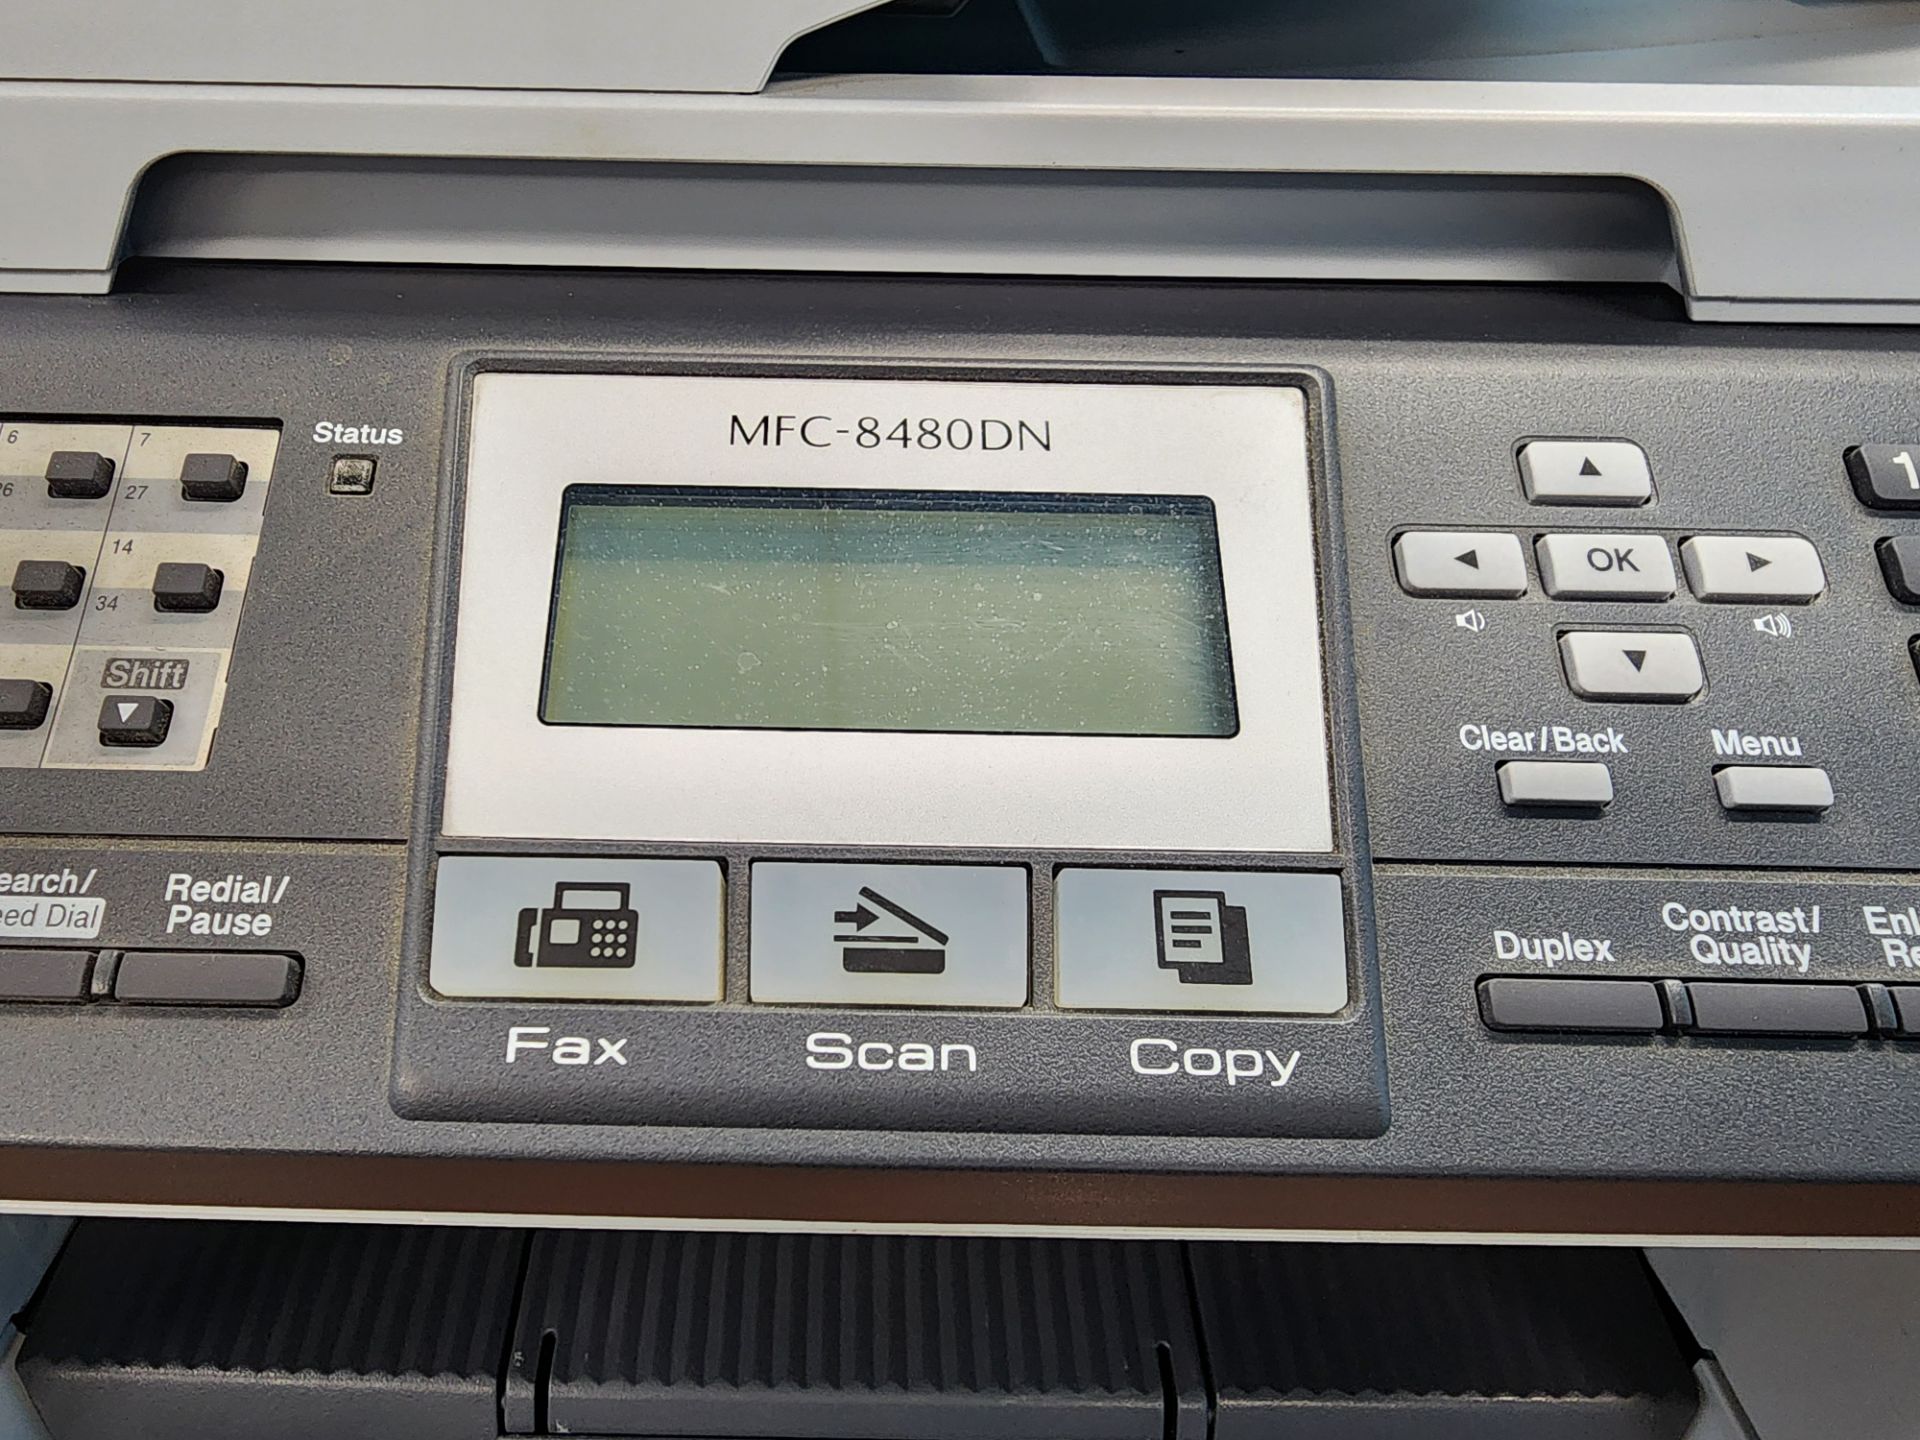 Brother MFC-8480DN Multi-Function Copier - Image 2 of 10